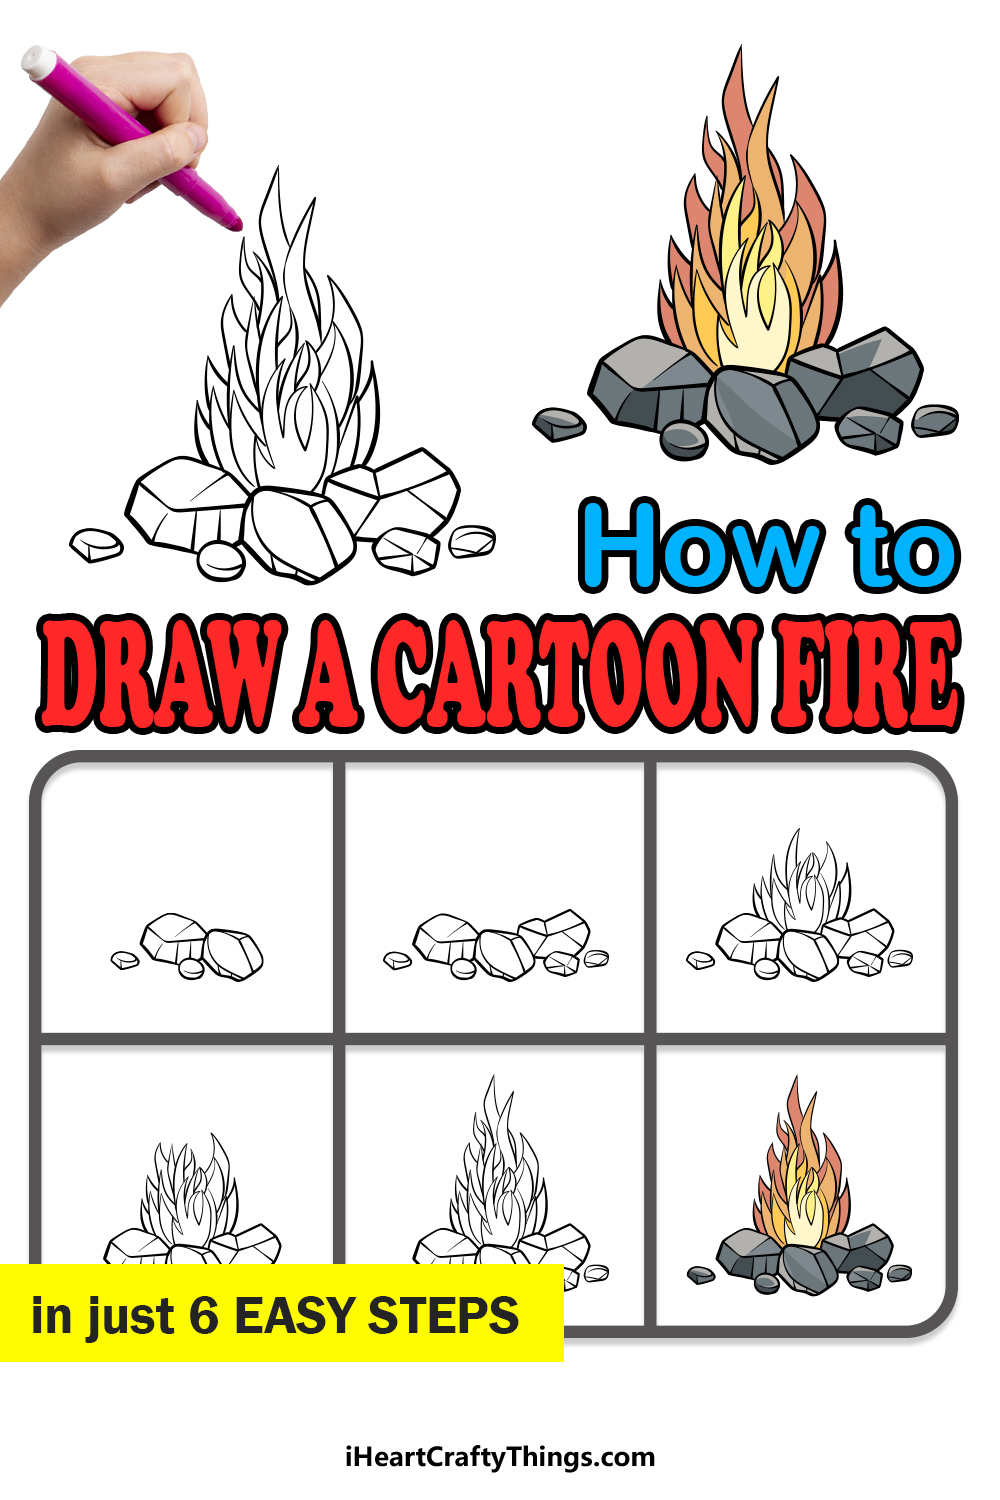 Cartoon Fire Drawing - How To Draw A Cartoon Fire Step By Step